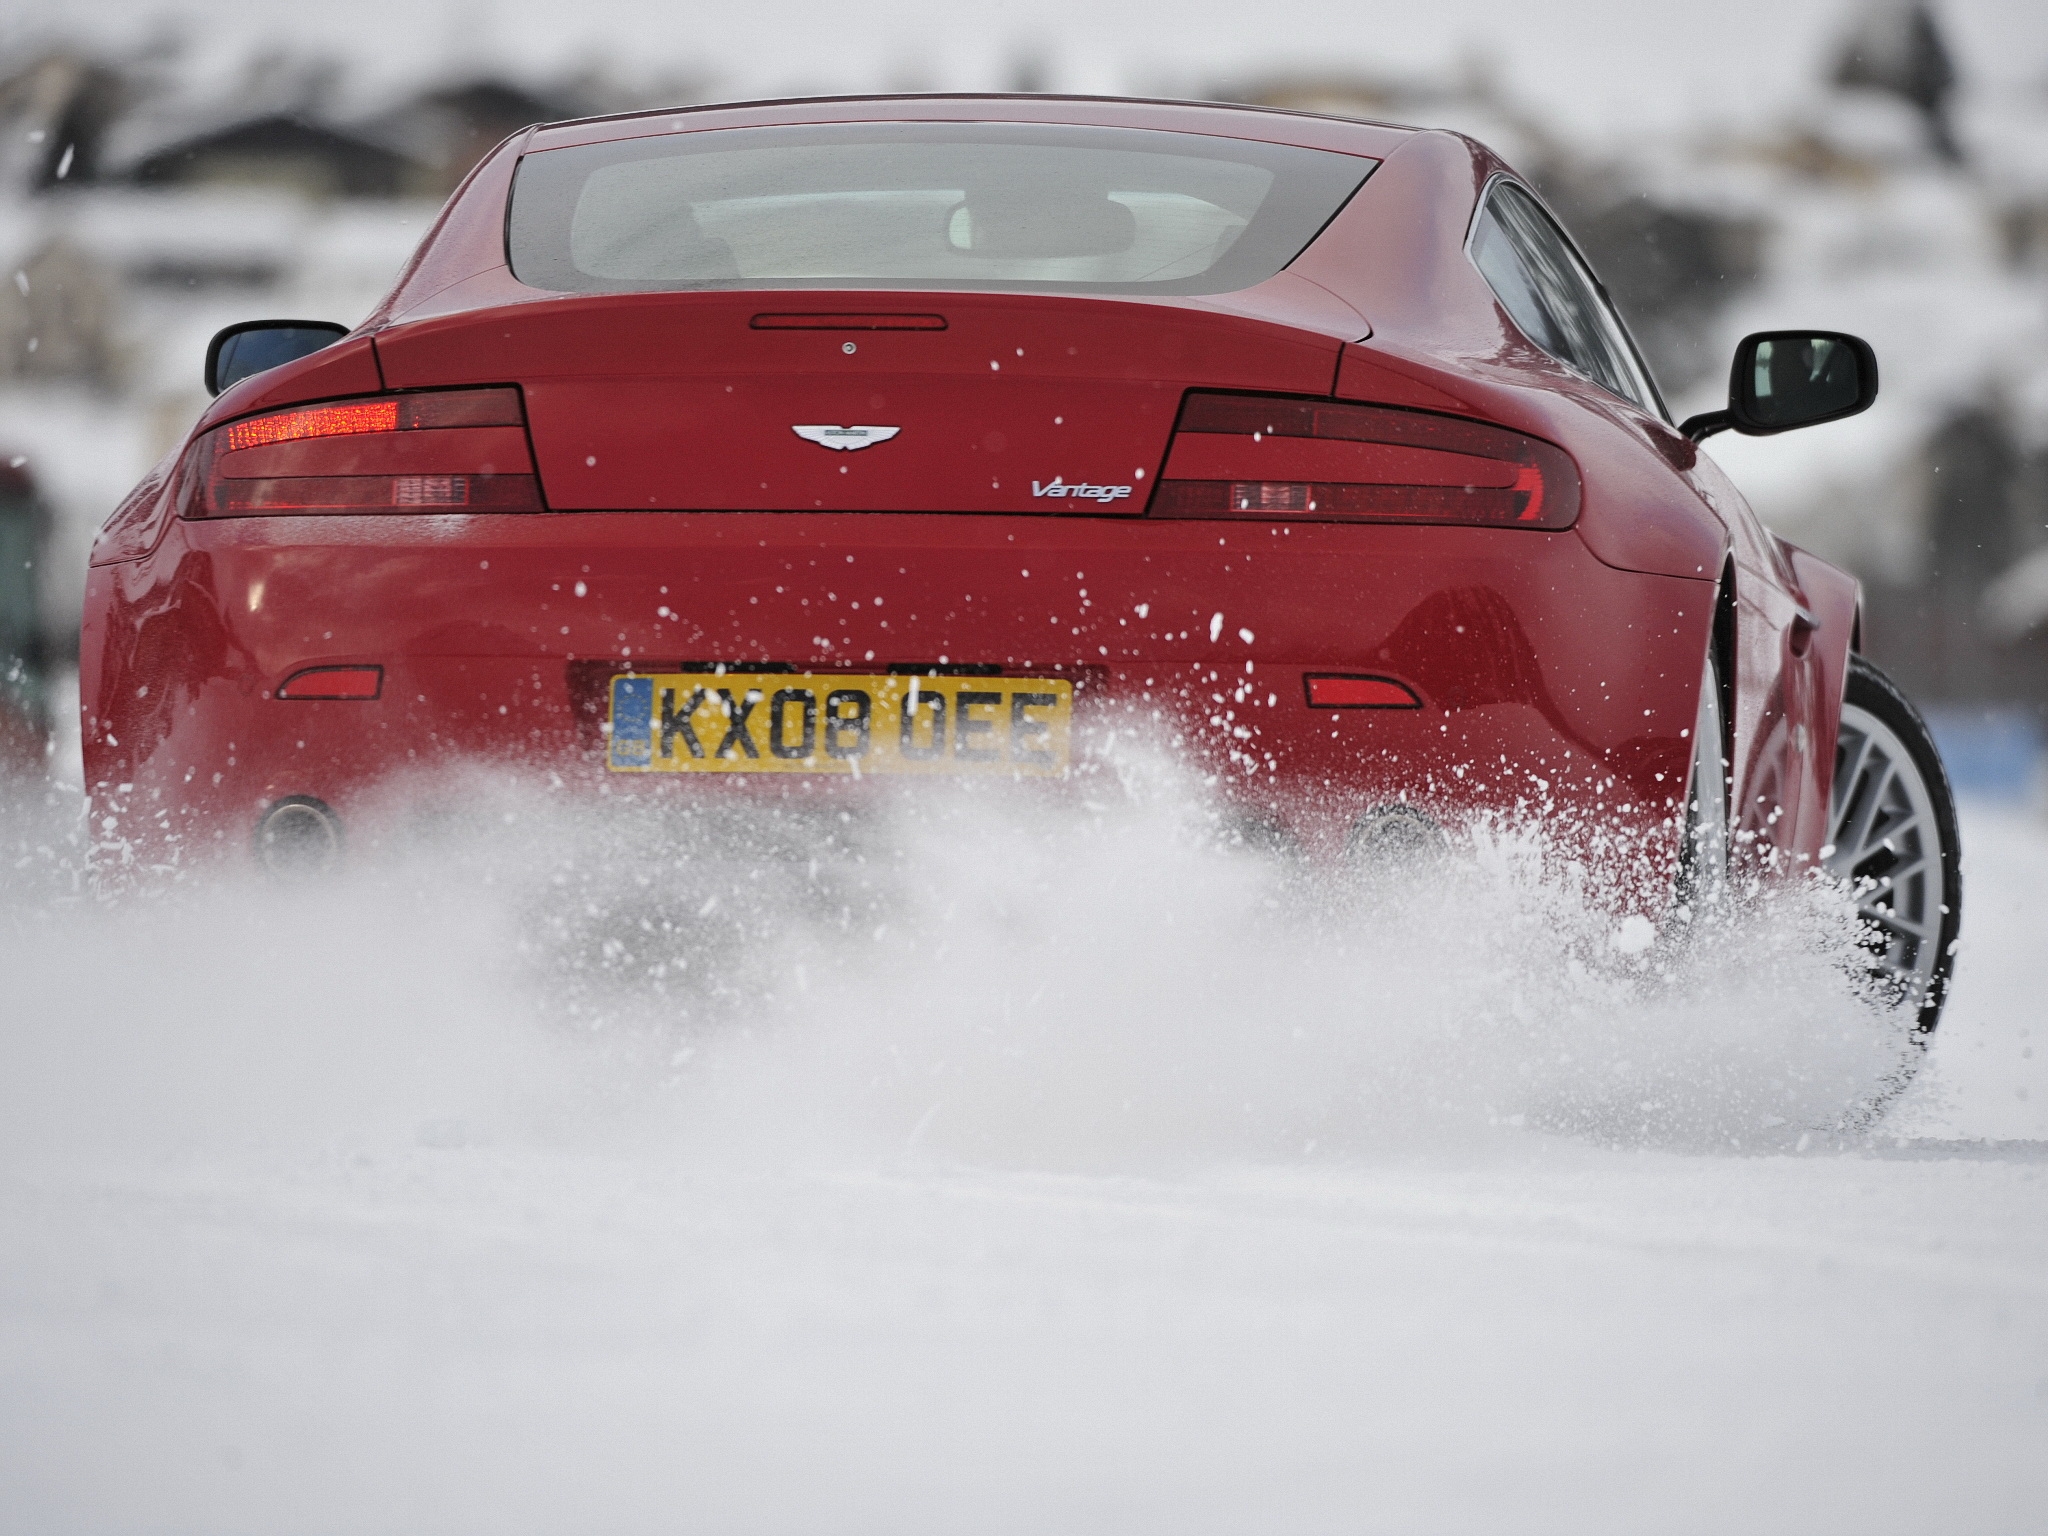 snow, aston martin, cars, red, back view, rear view, style, 2008, v8, drift